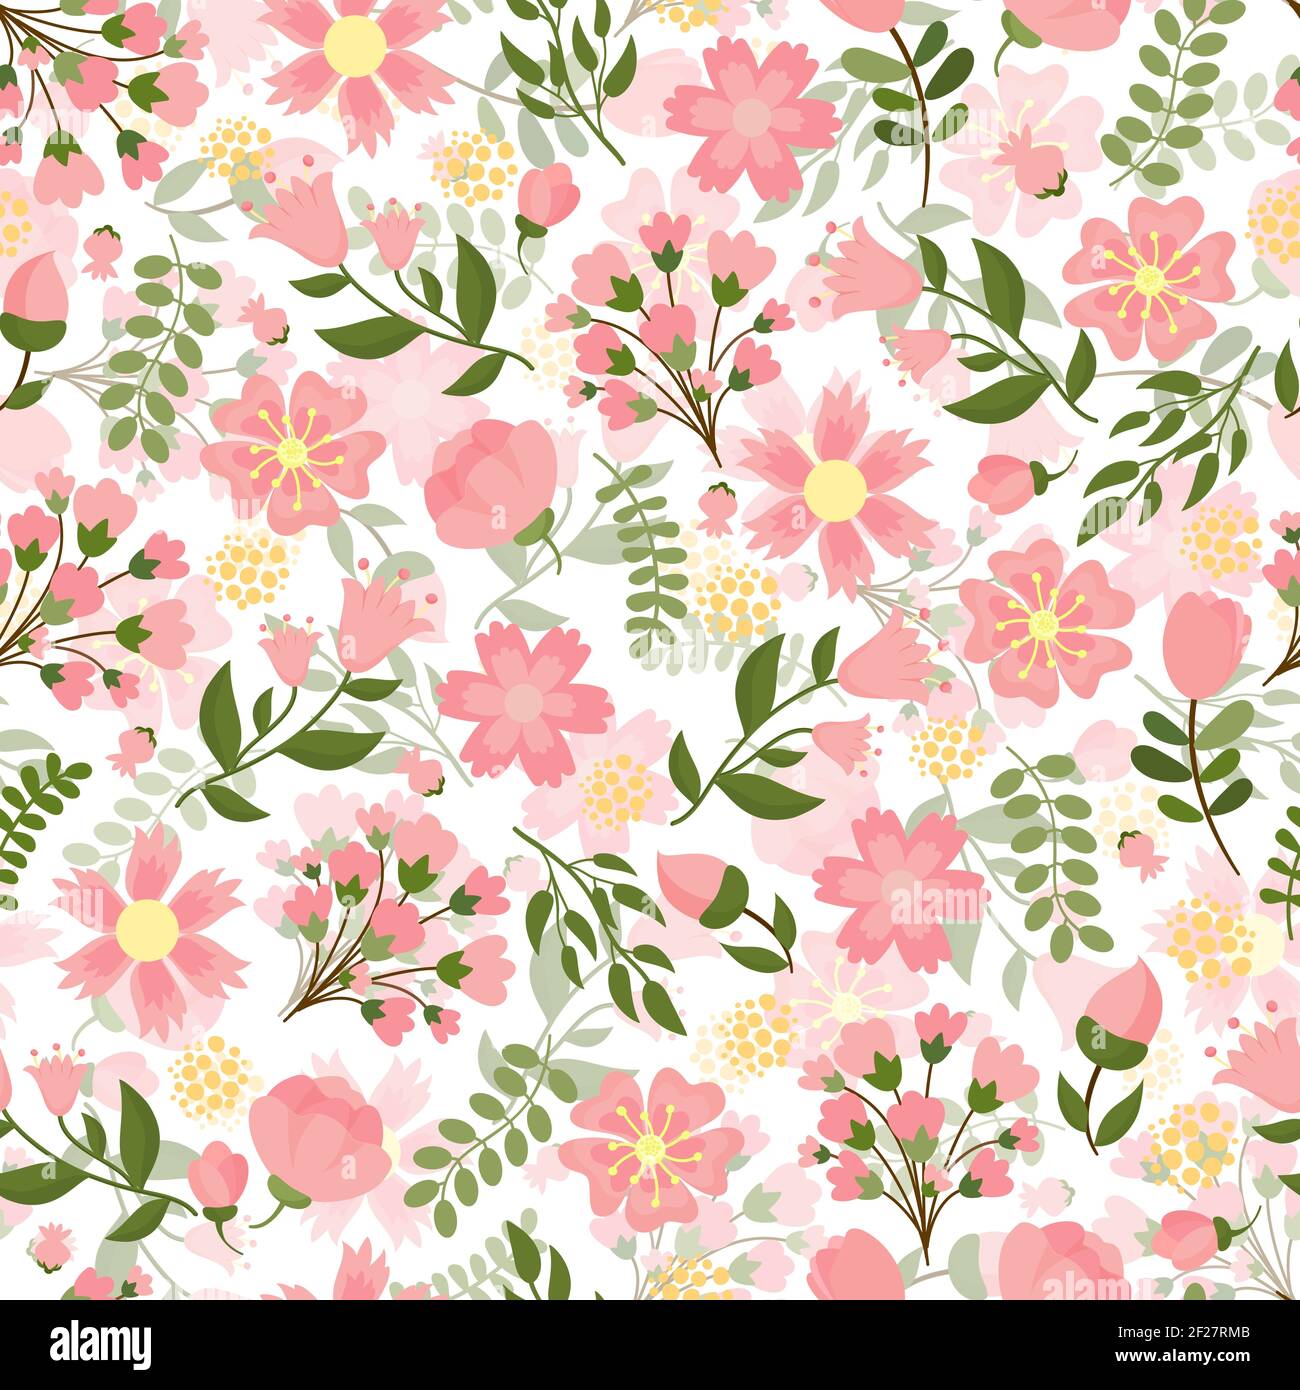 Seamless spring floral background with a dense pattern of pretty